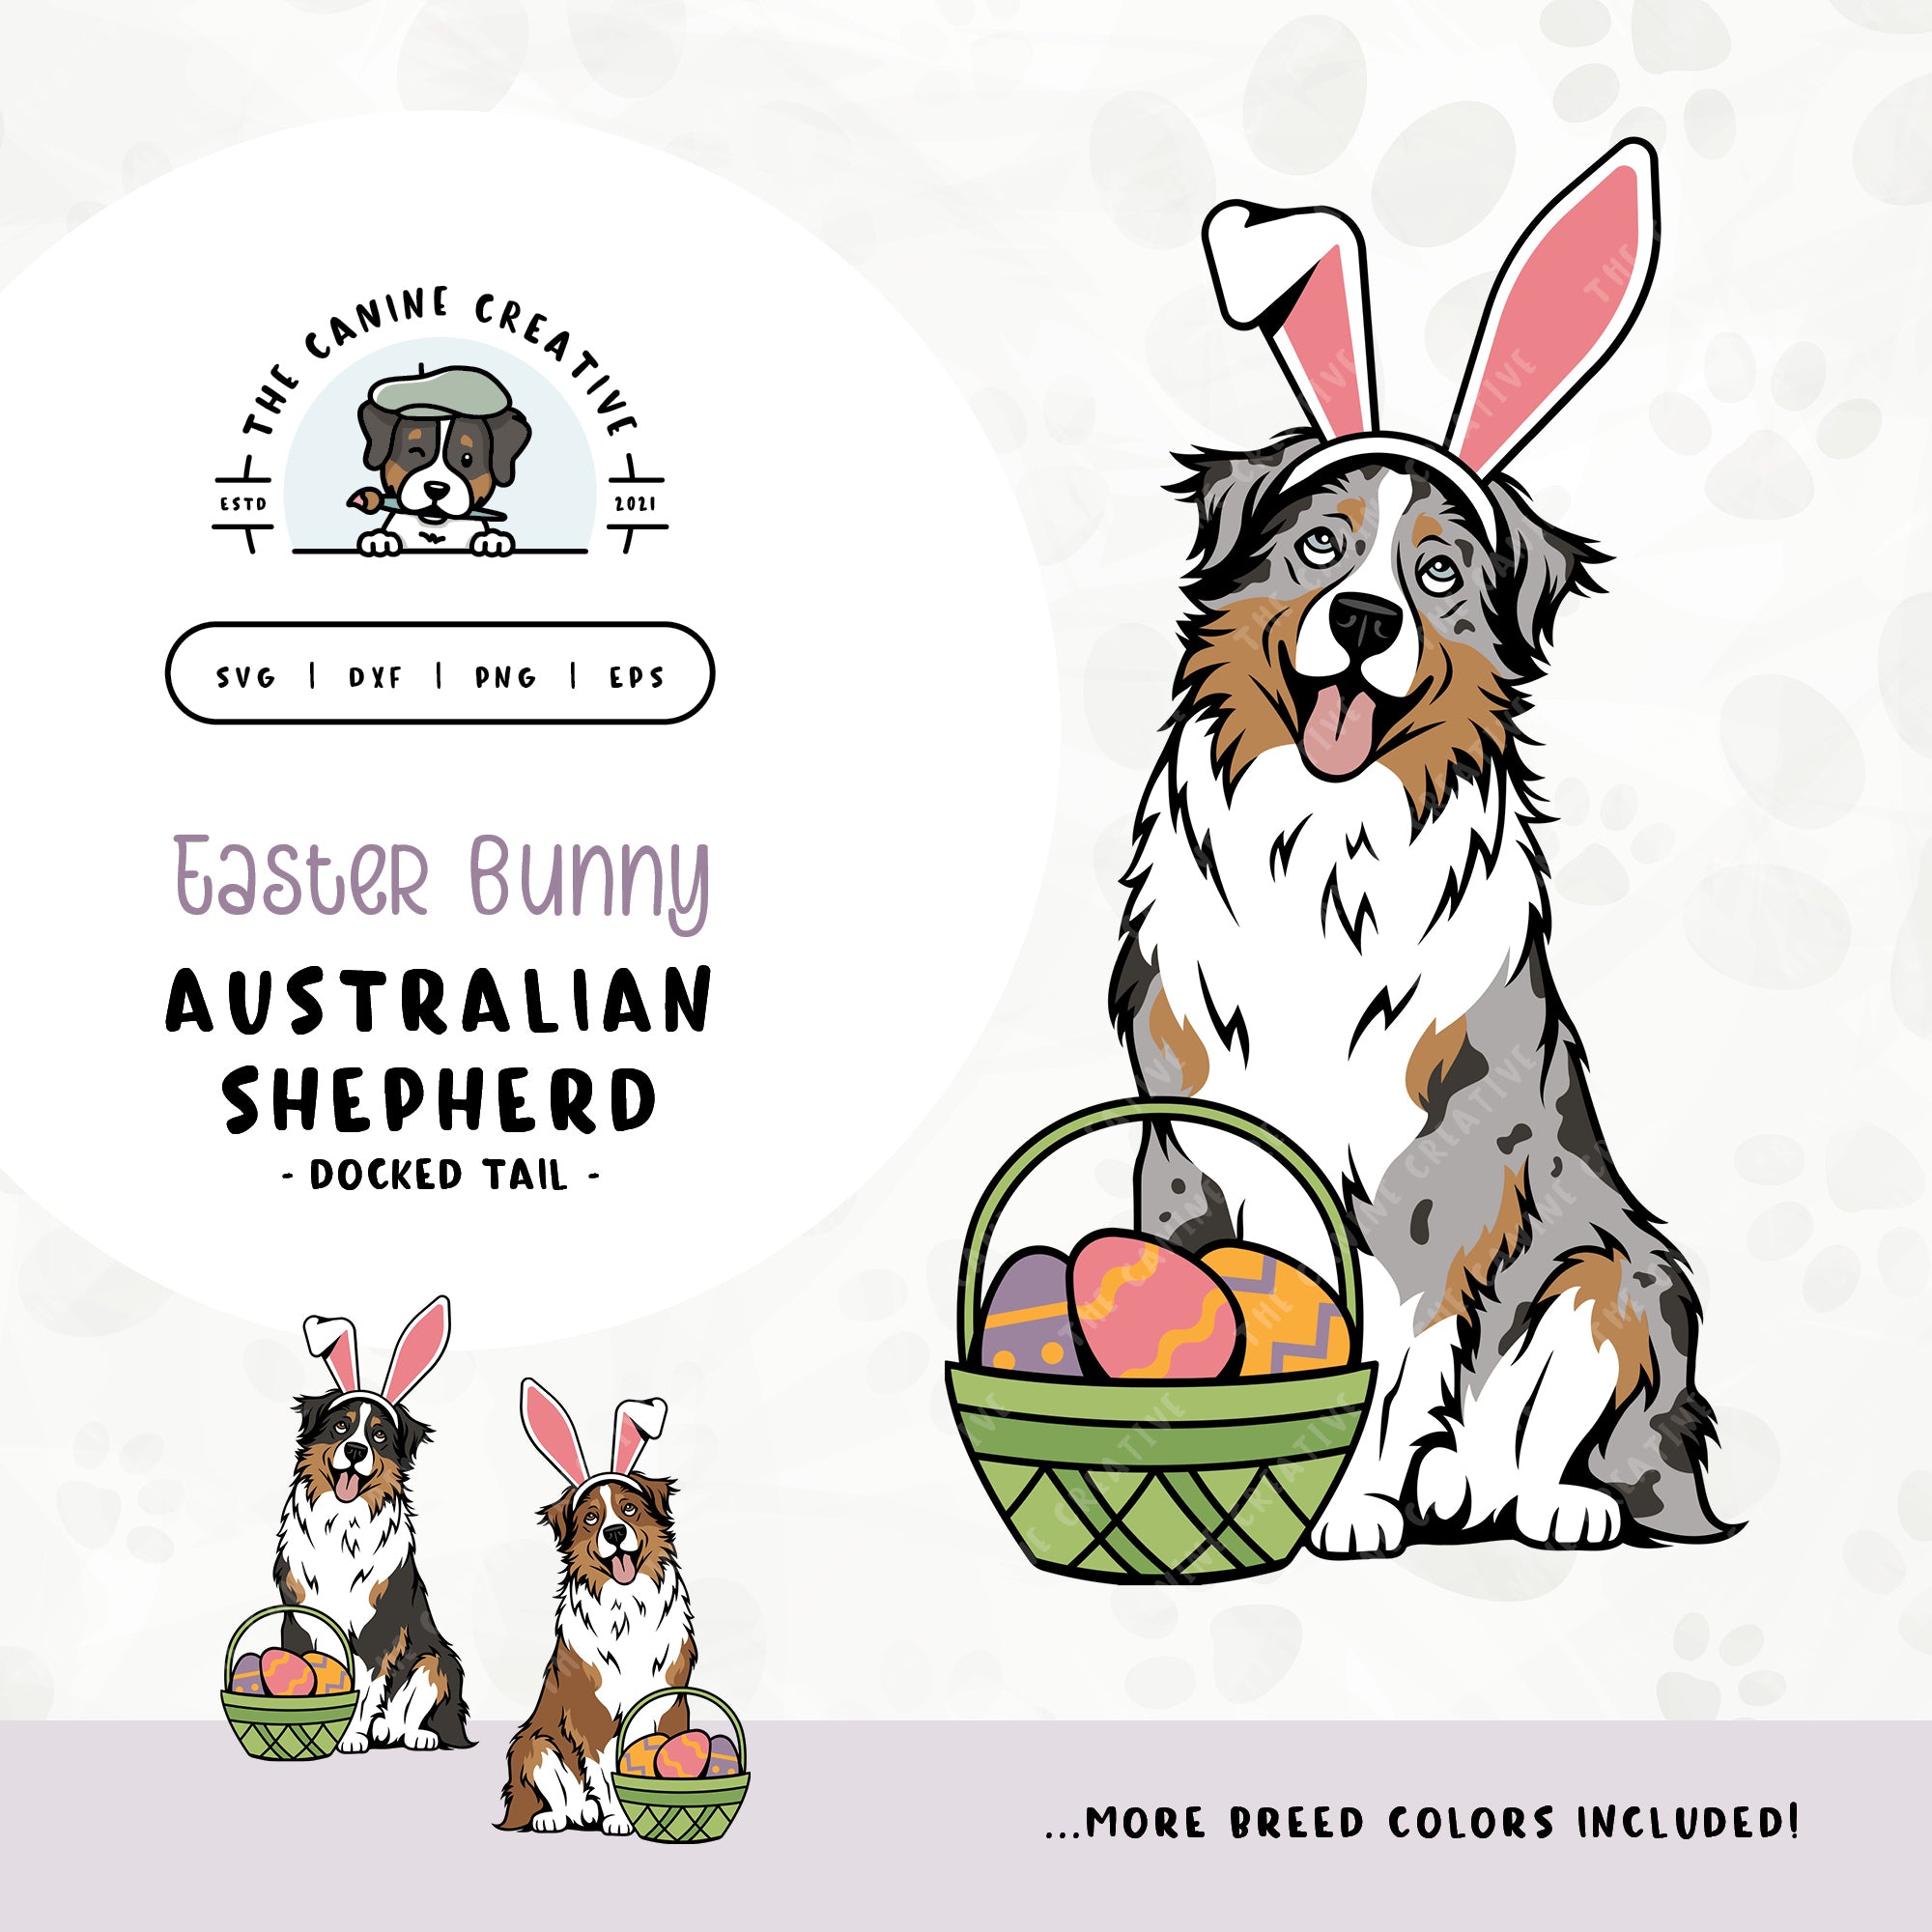 This springtime illustration features a docked tail Australian Shepherd adorned with festive bunny ears sitting next to a basket of brightly-colored Easter eggs. File formats include: SVG, DXF, PNG, and EPS.